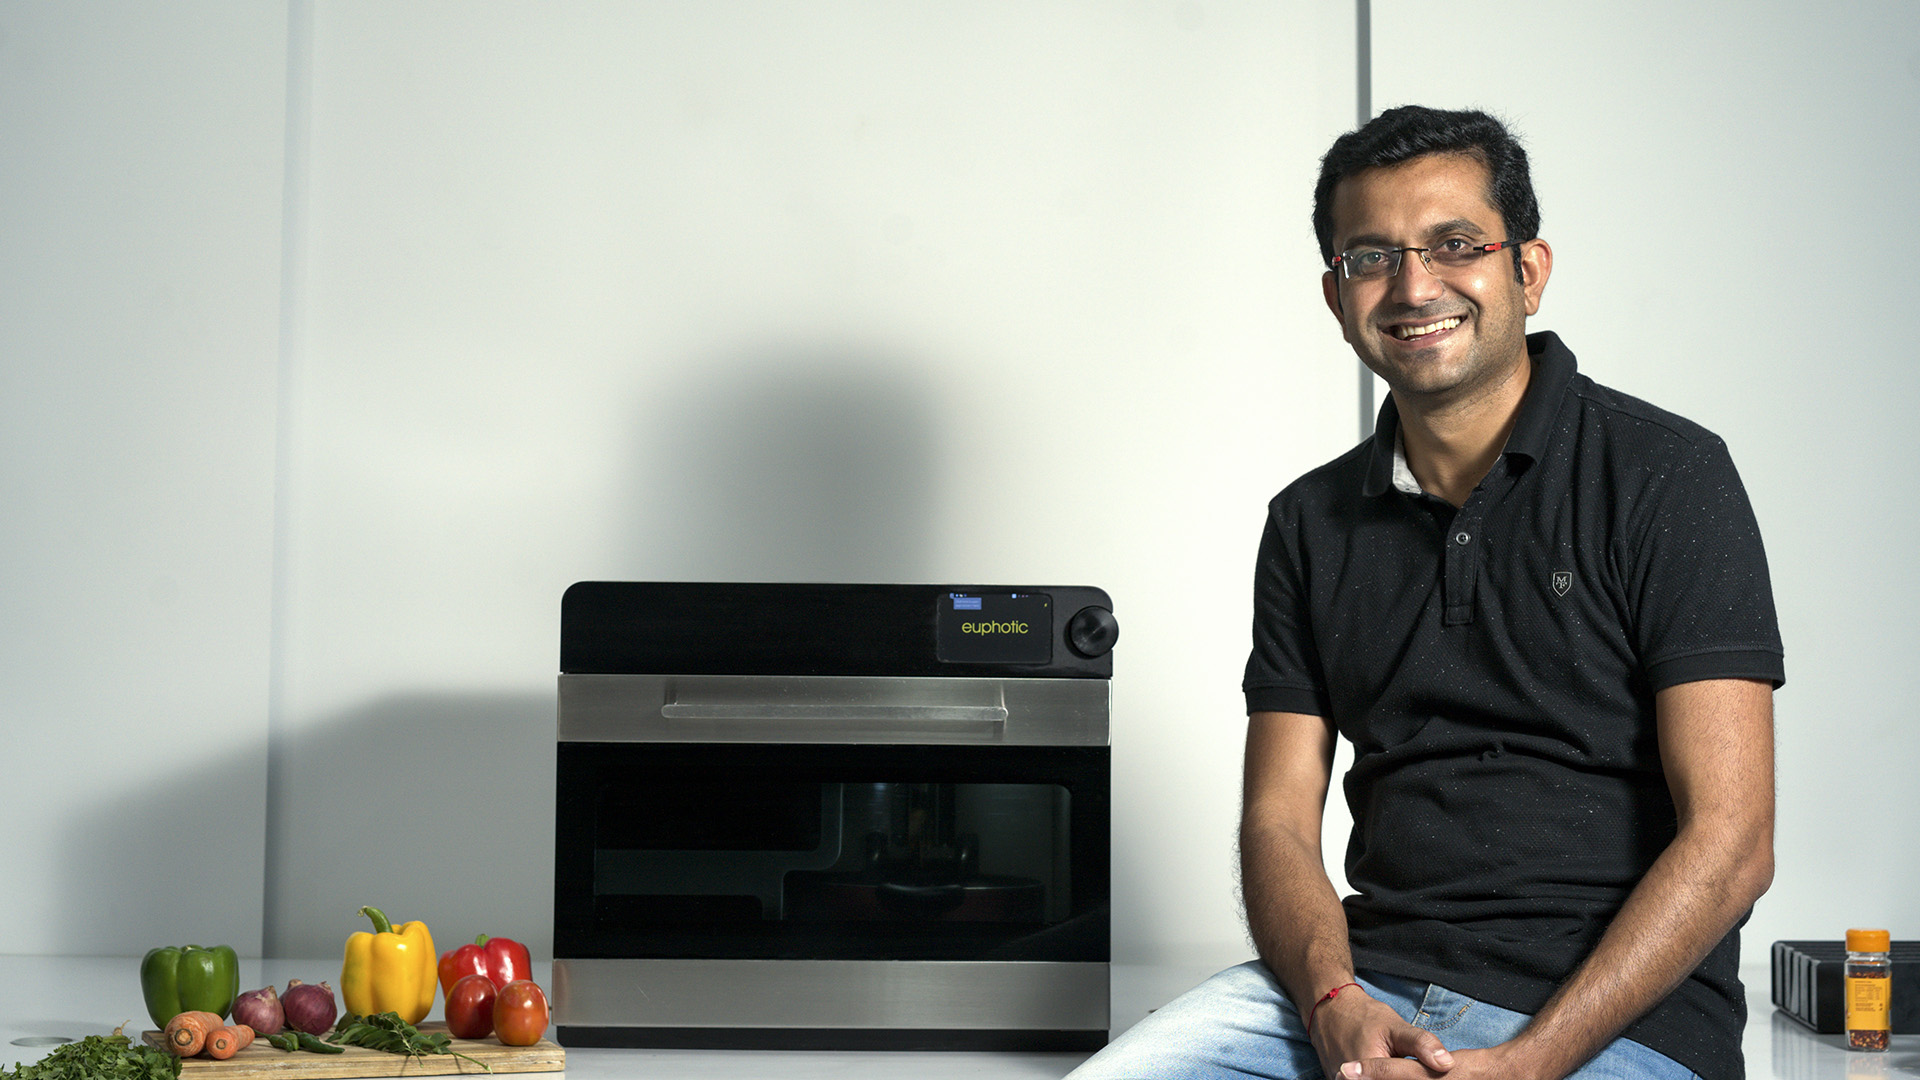 Robot cooks come to home kitchens